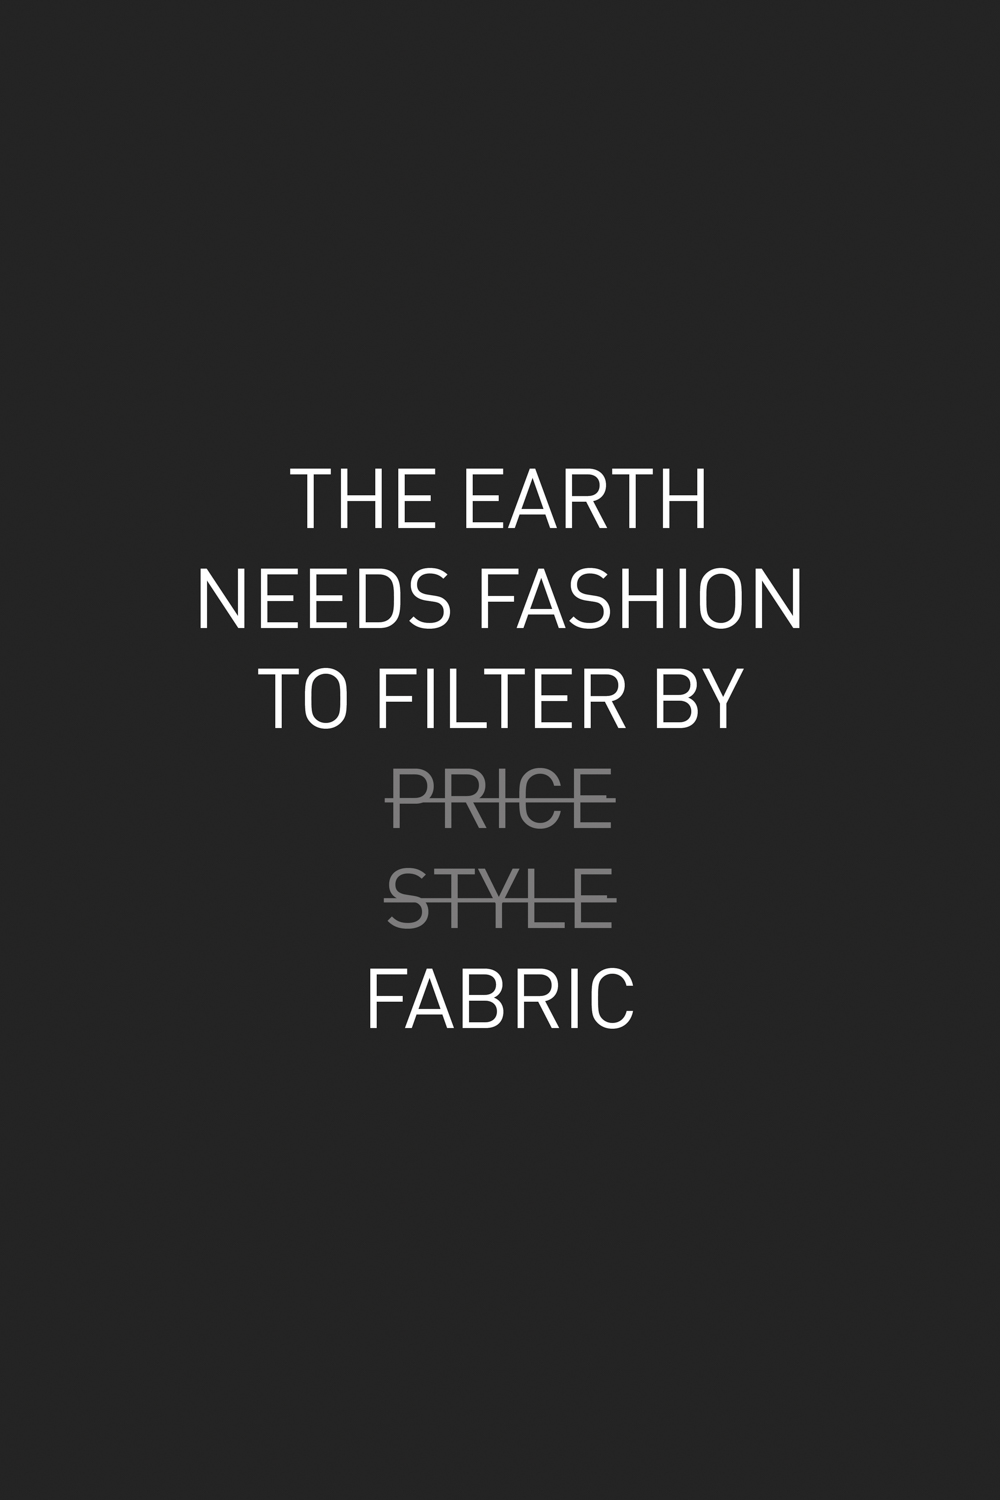 'The Earth needs fashion to filter by fabric'